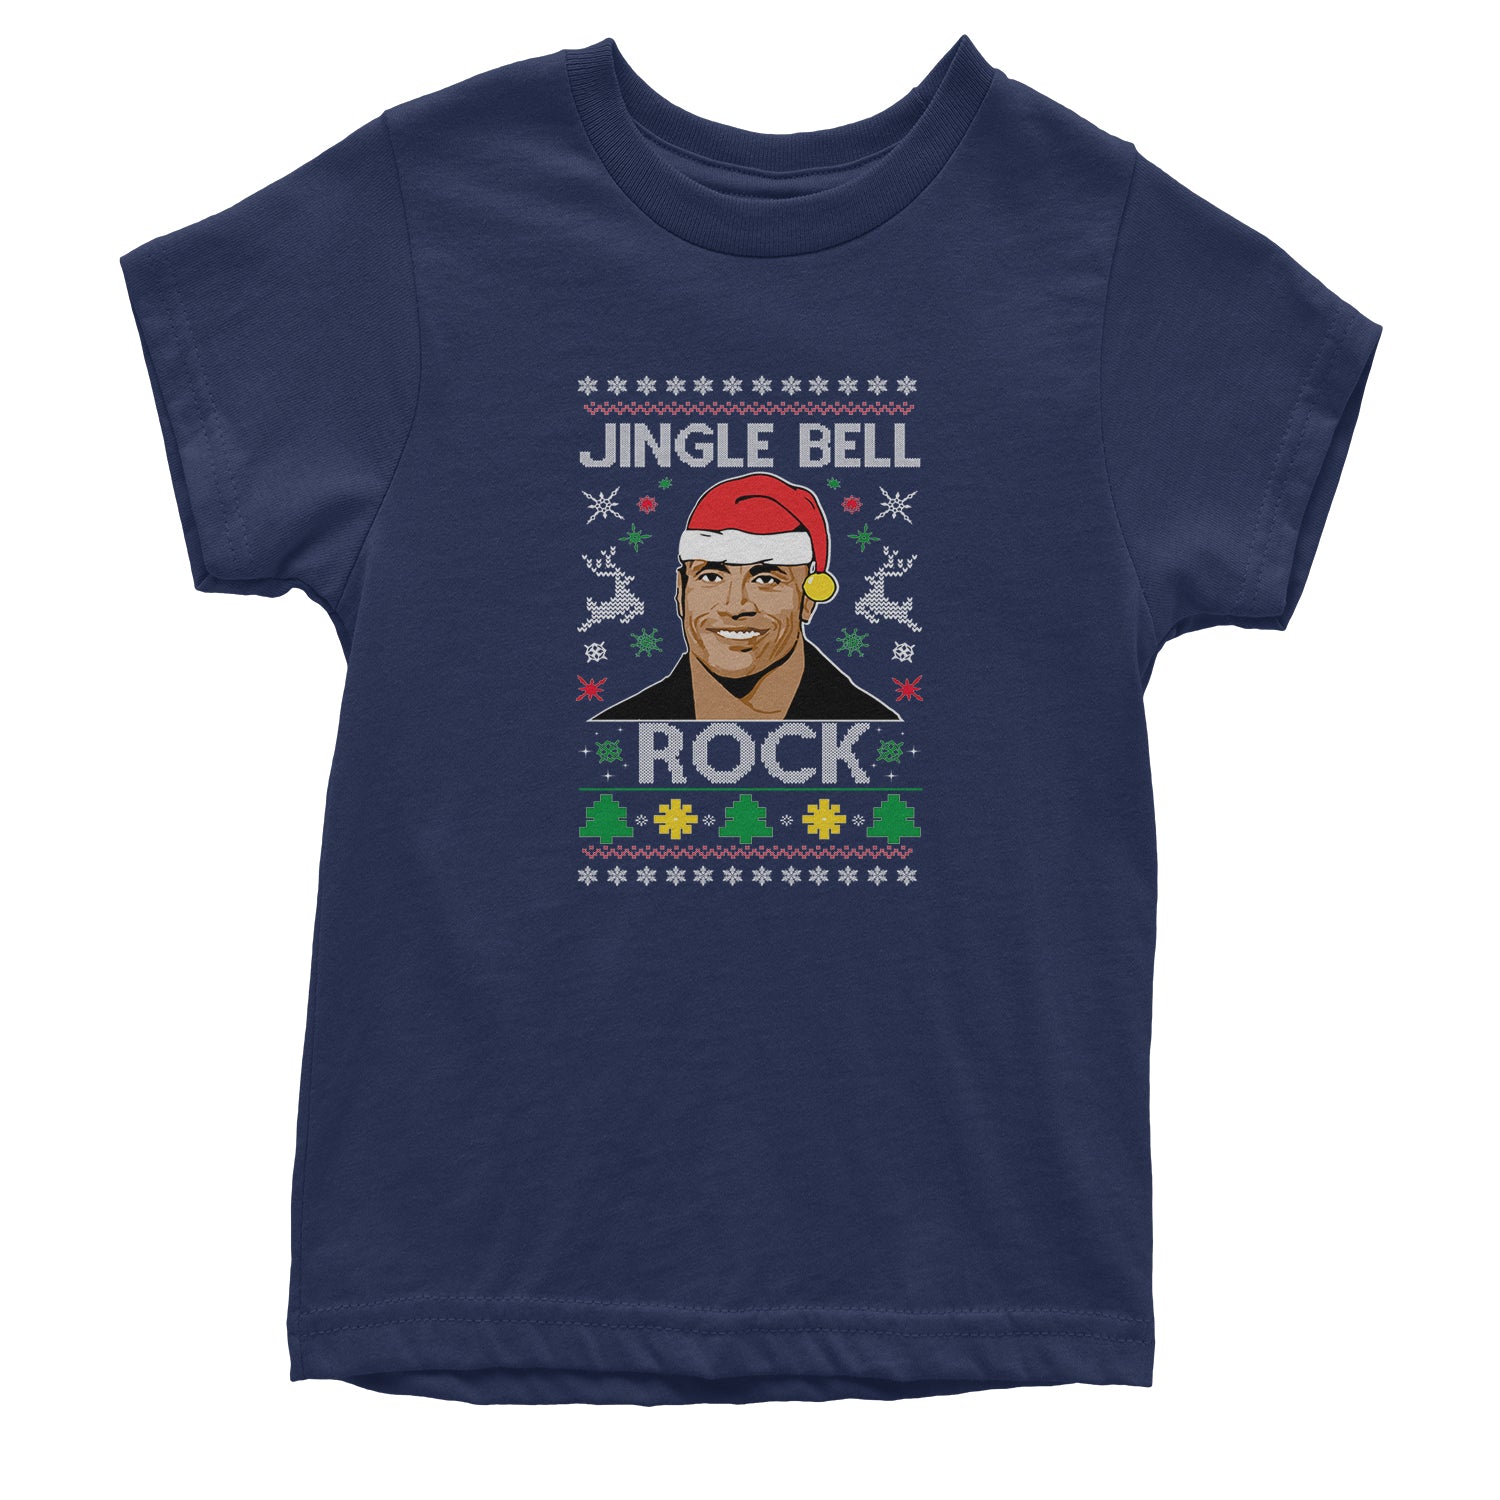 Jingle Bell Rock Ugly Christmas Youth T-shirt 2018, champ, Christmas, dwayne, johnson, peoples, rock, Sweatshirts, the, Ugly by Expression Tees